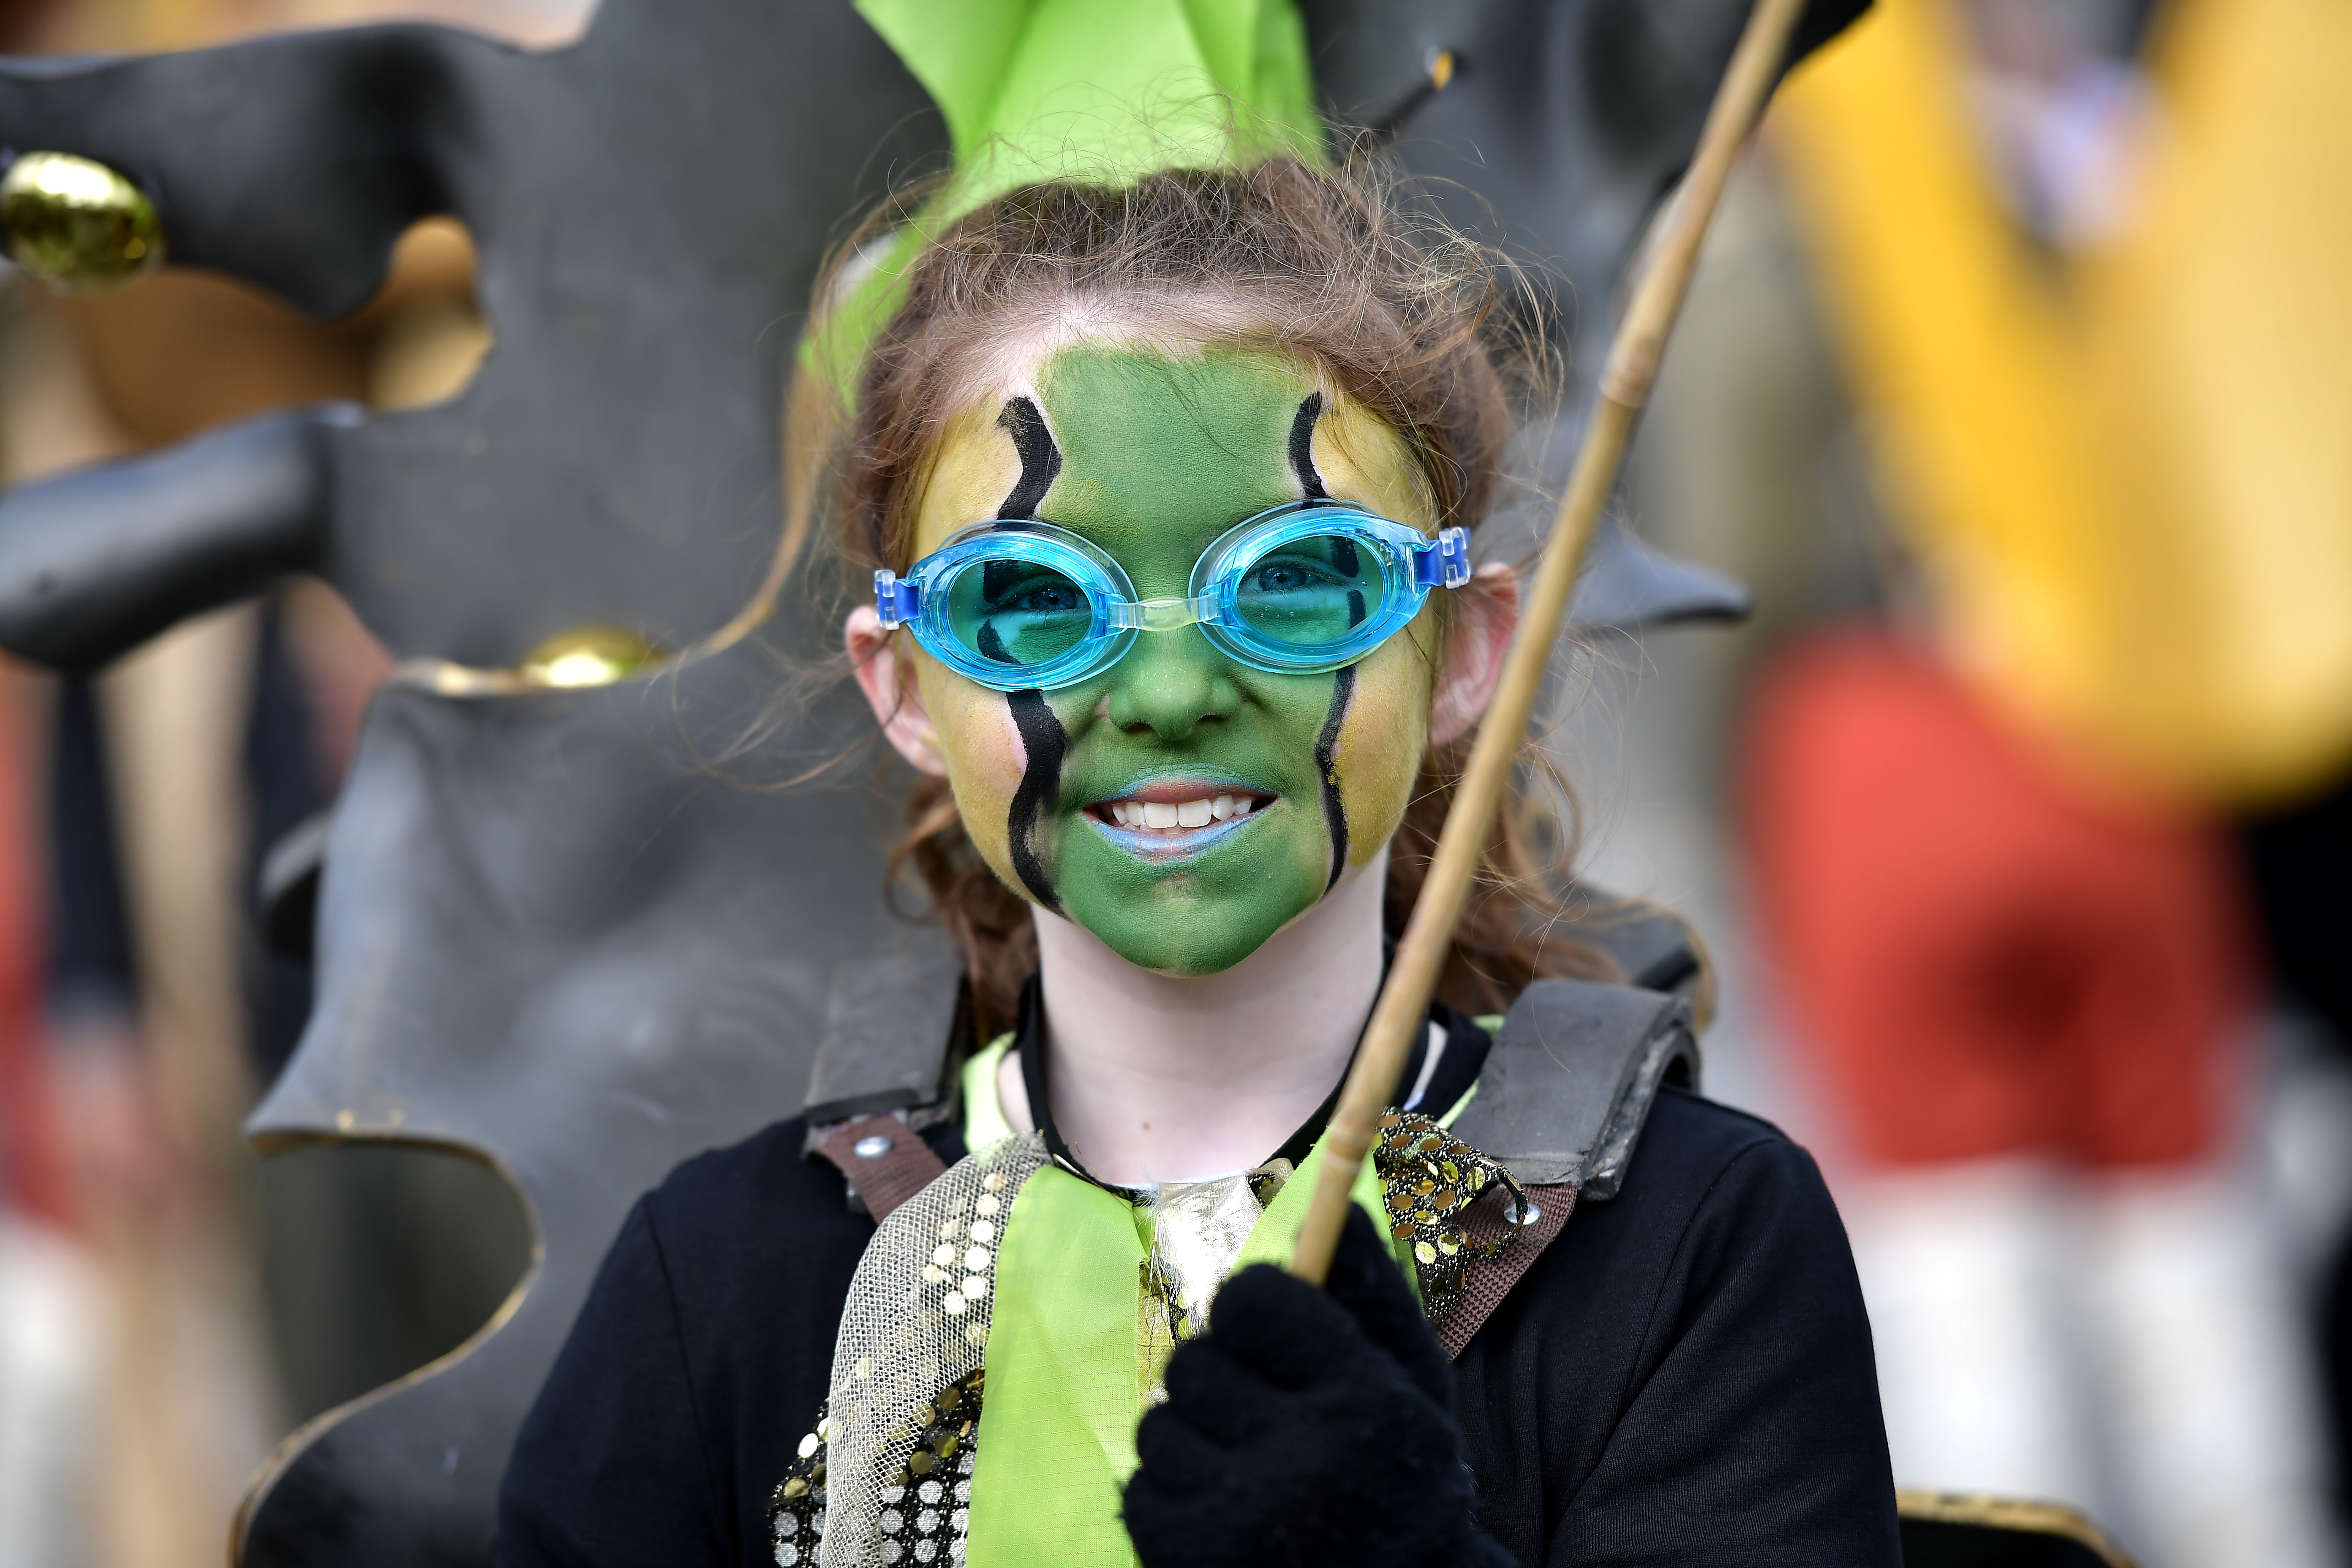 Festival participants take part in the annual Saint Patrick's Day parade on March 17, 2019 in Dublin, Ireland.